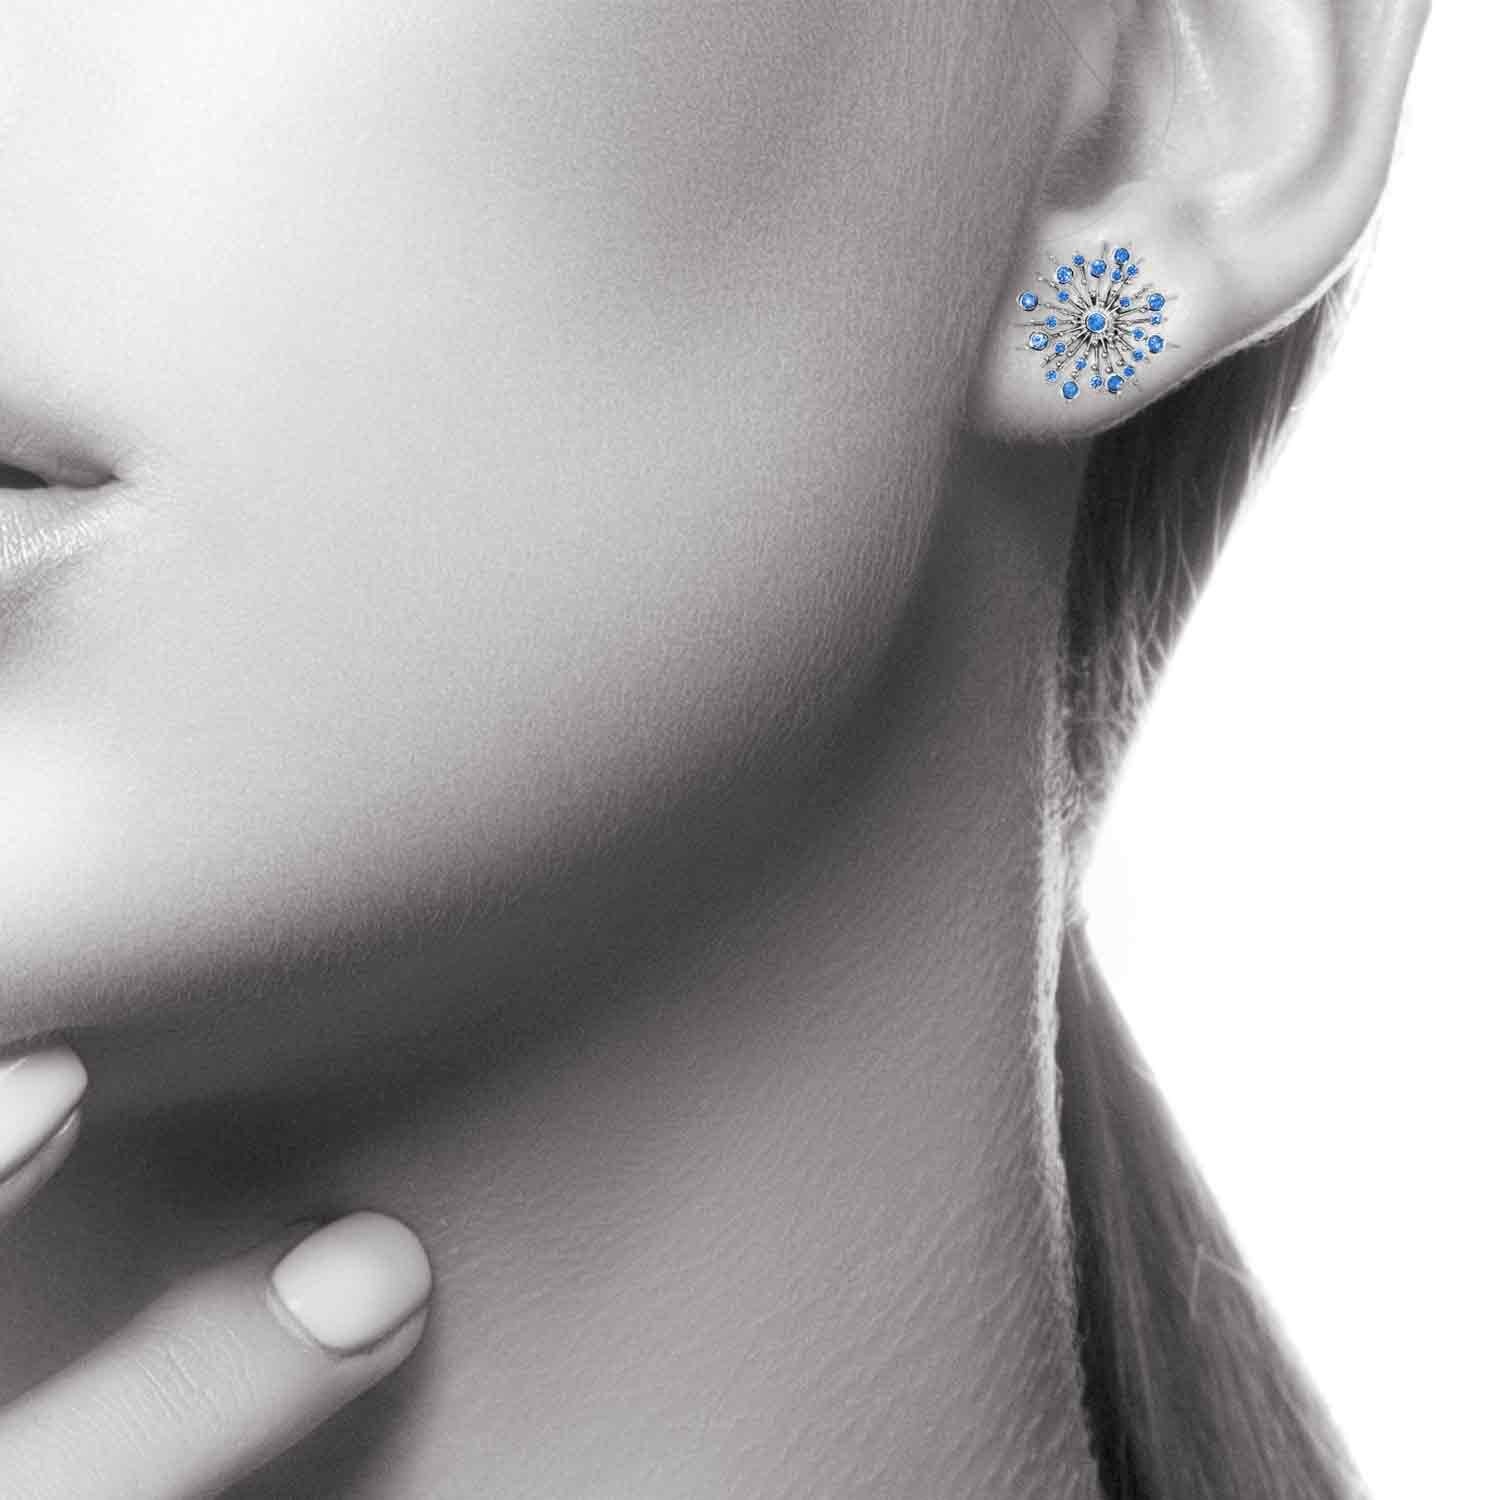 Part of the 'Soleil' collection by Natalie Barney, these stud earrings feature 48 Blue Sapphires with a total weight of 0.44 carats. The matching pendant is available.

Made in 9 carat white gold.  Please request the video for an even closer view of